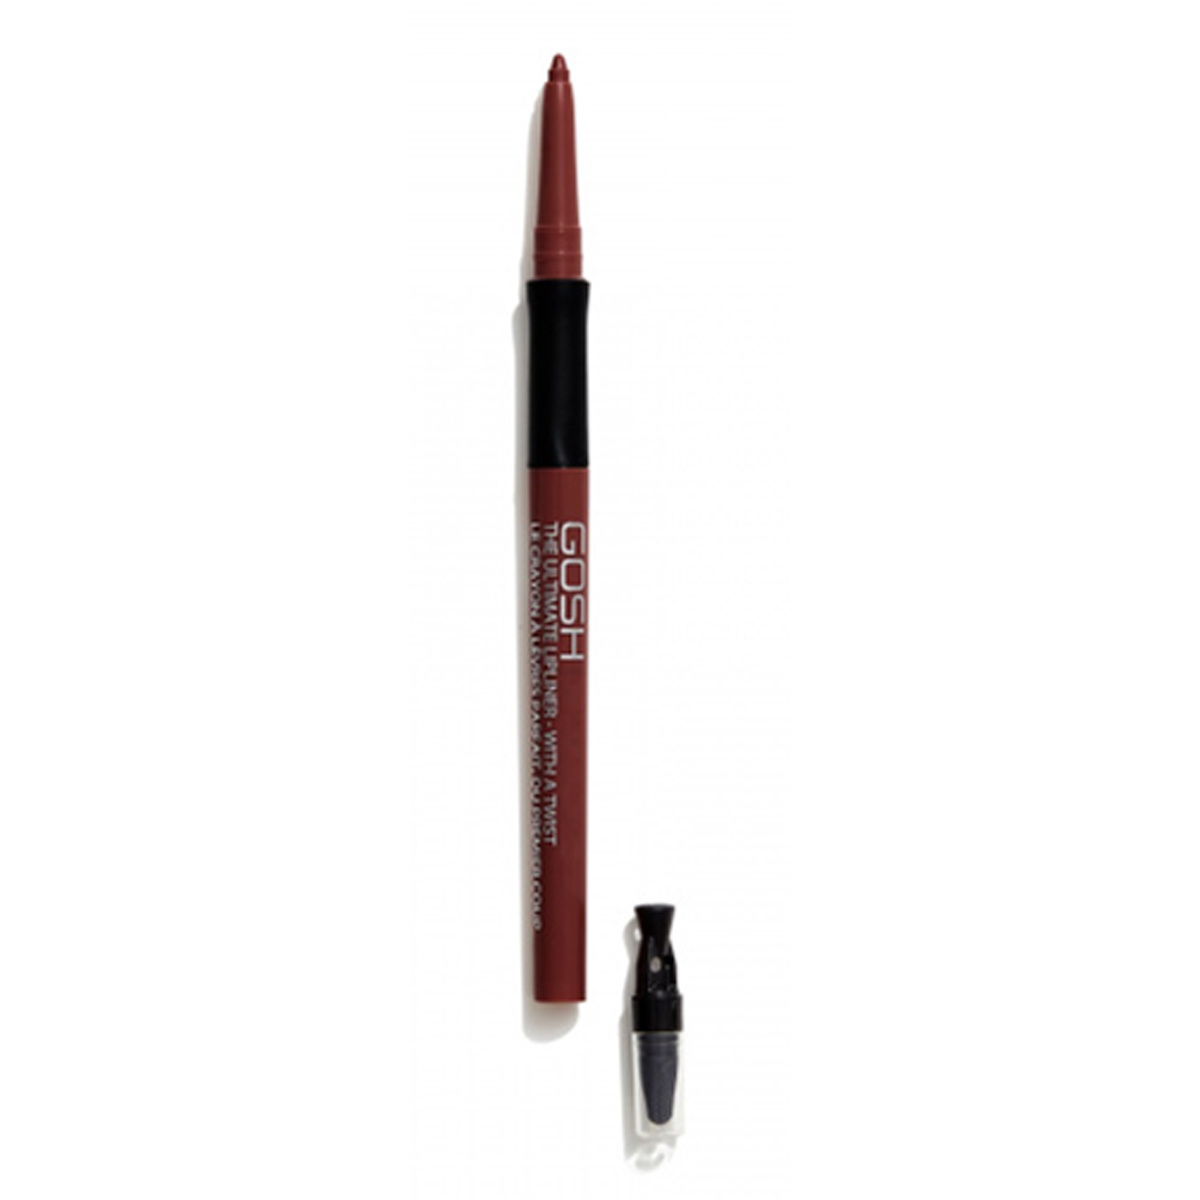 Gosh The Ultimate Lipliner With A Twist Chestnut 005 1 pc